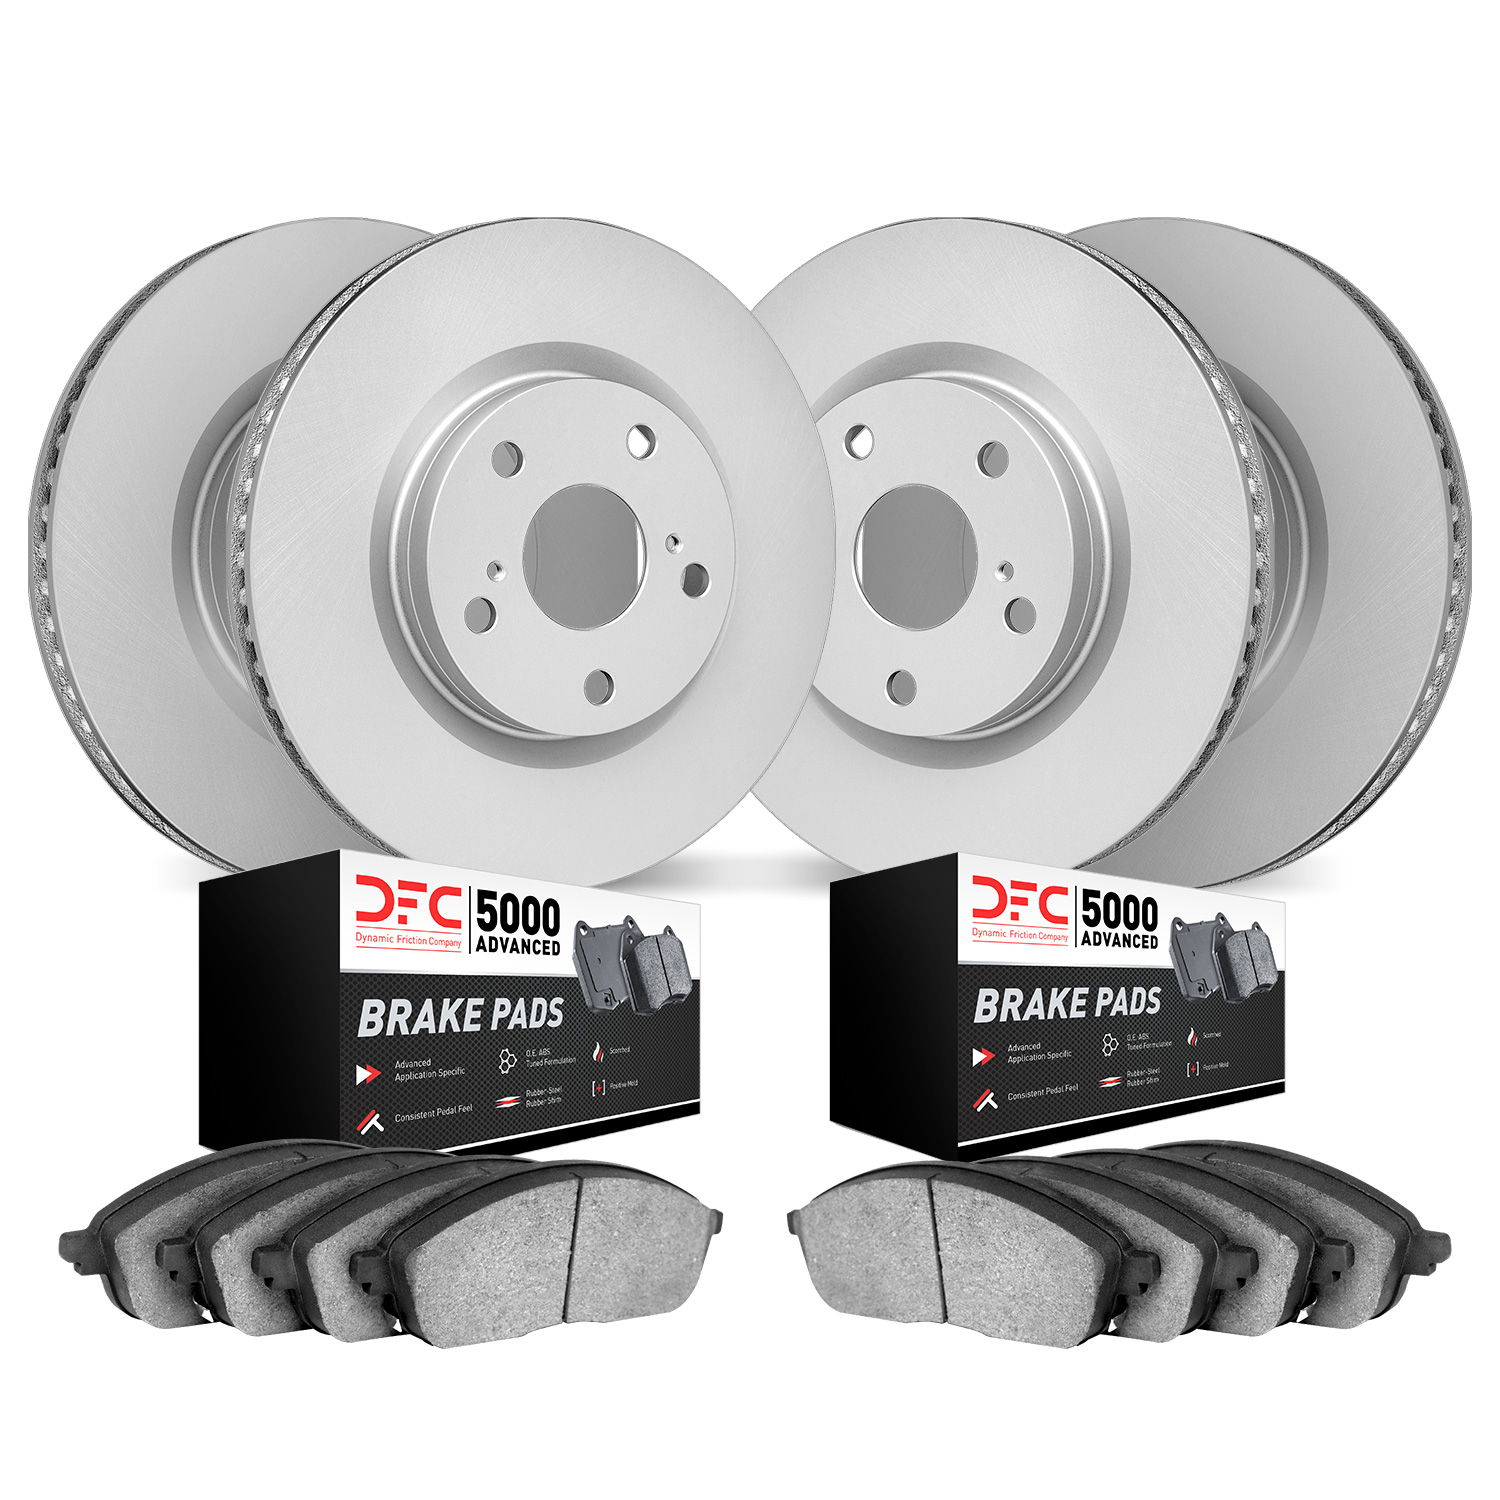 4504-54130 Geospec Brake Rotors w/5000 Advanced Brake Pads Kit, 2012-2014 Ford/Lincoln/Mercury/Mazda, Position: Front and Rear